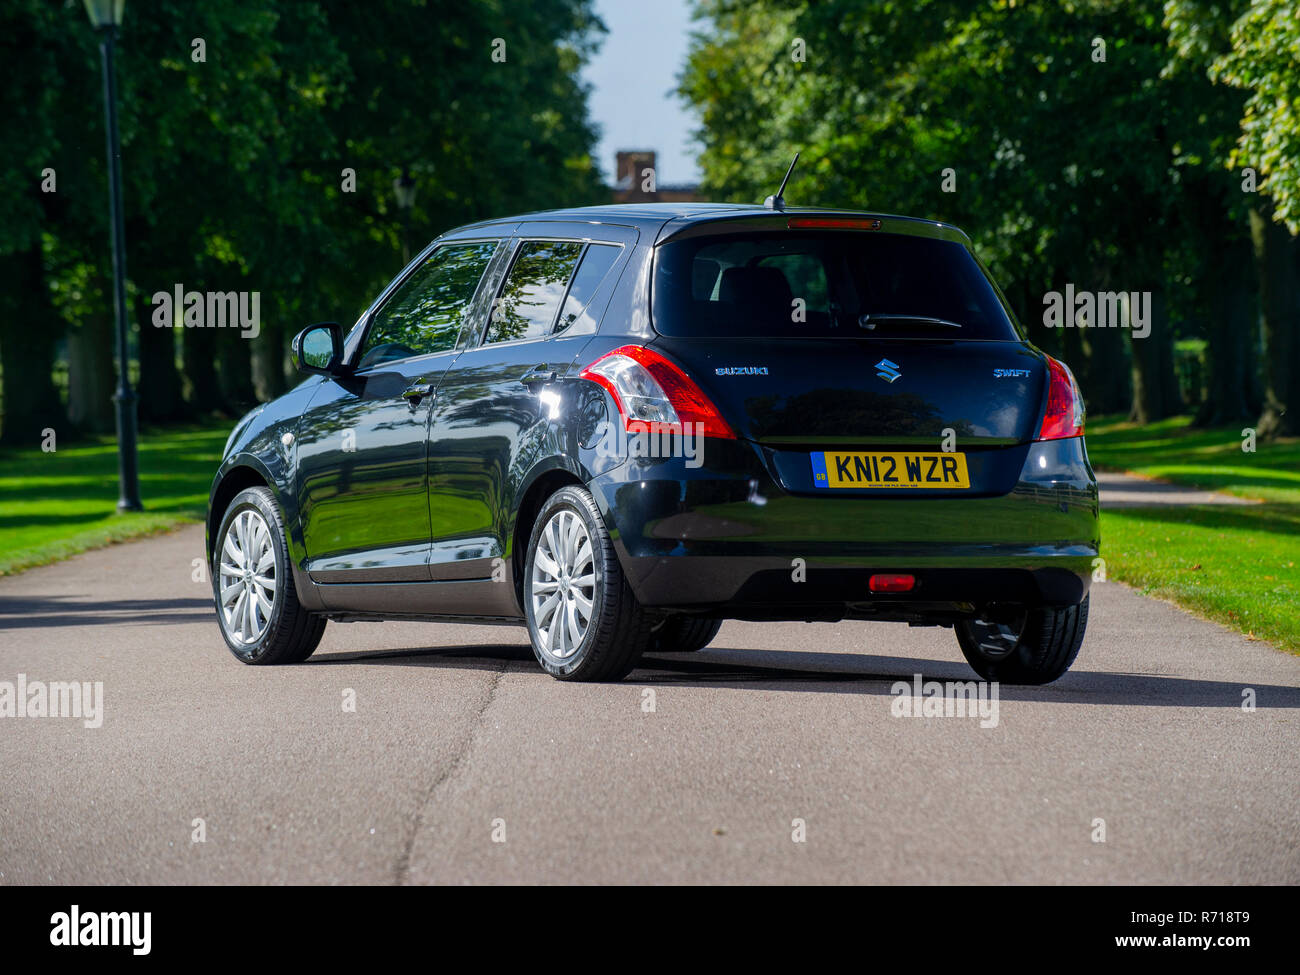 Suzuki Swift High Resolution Stock Photography and Images - Alamy